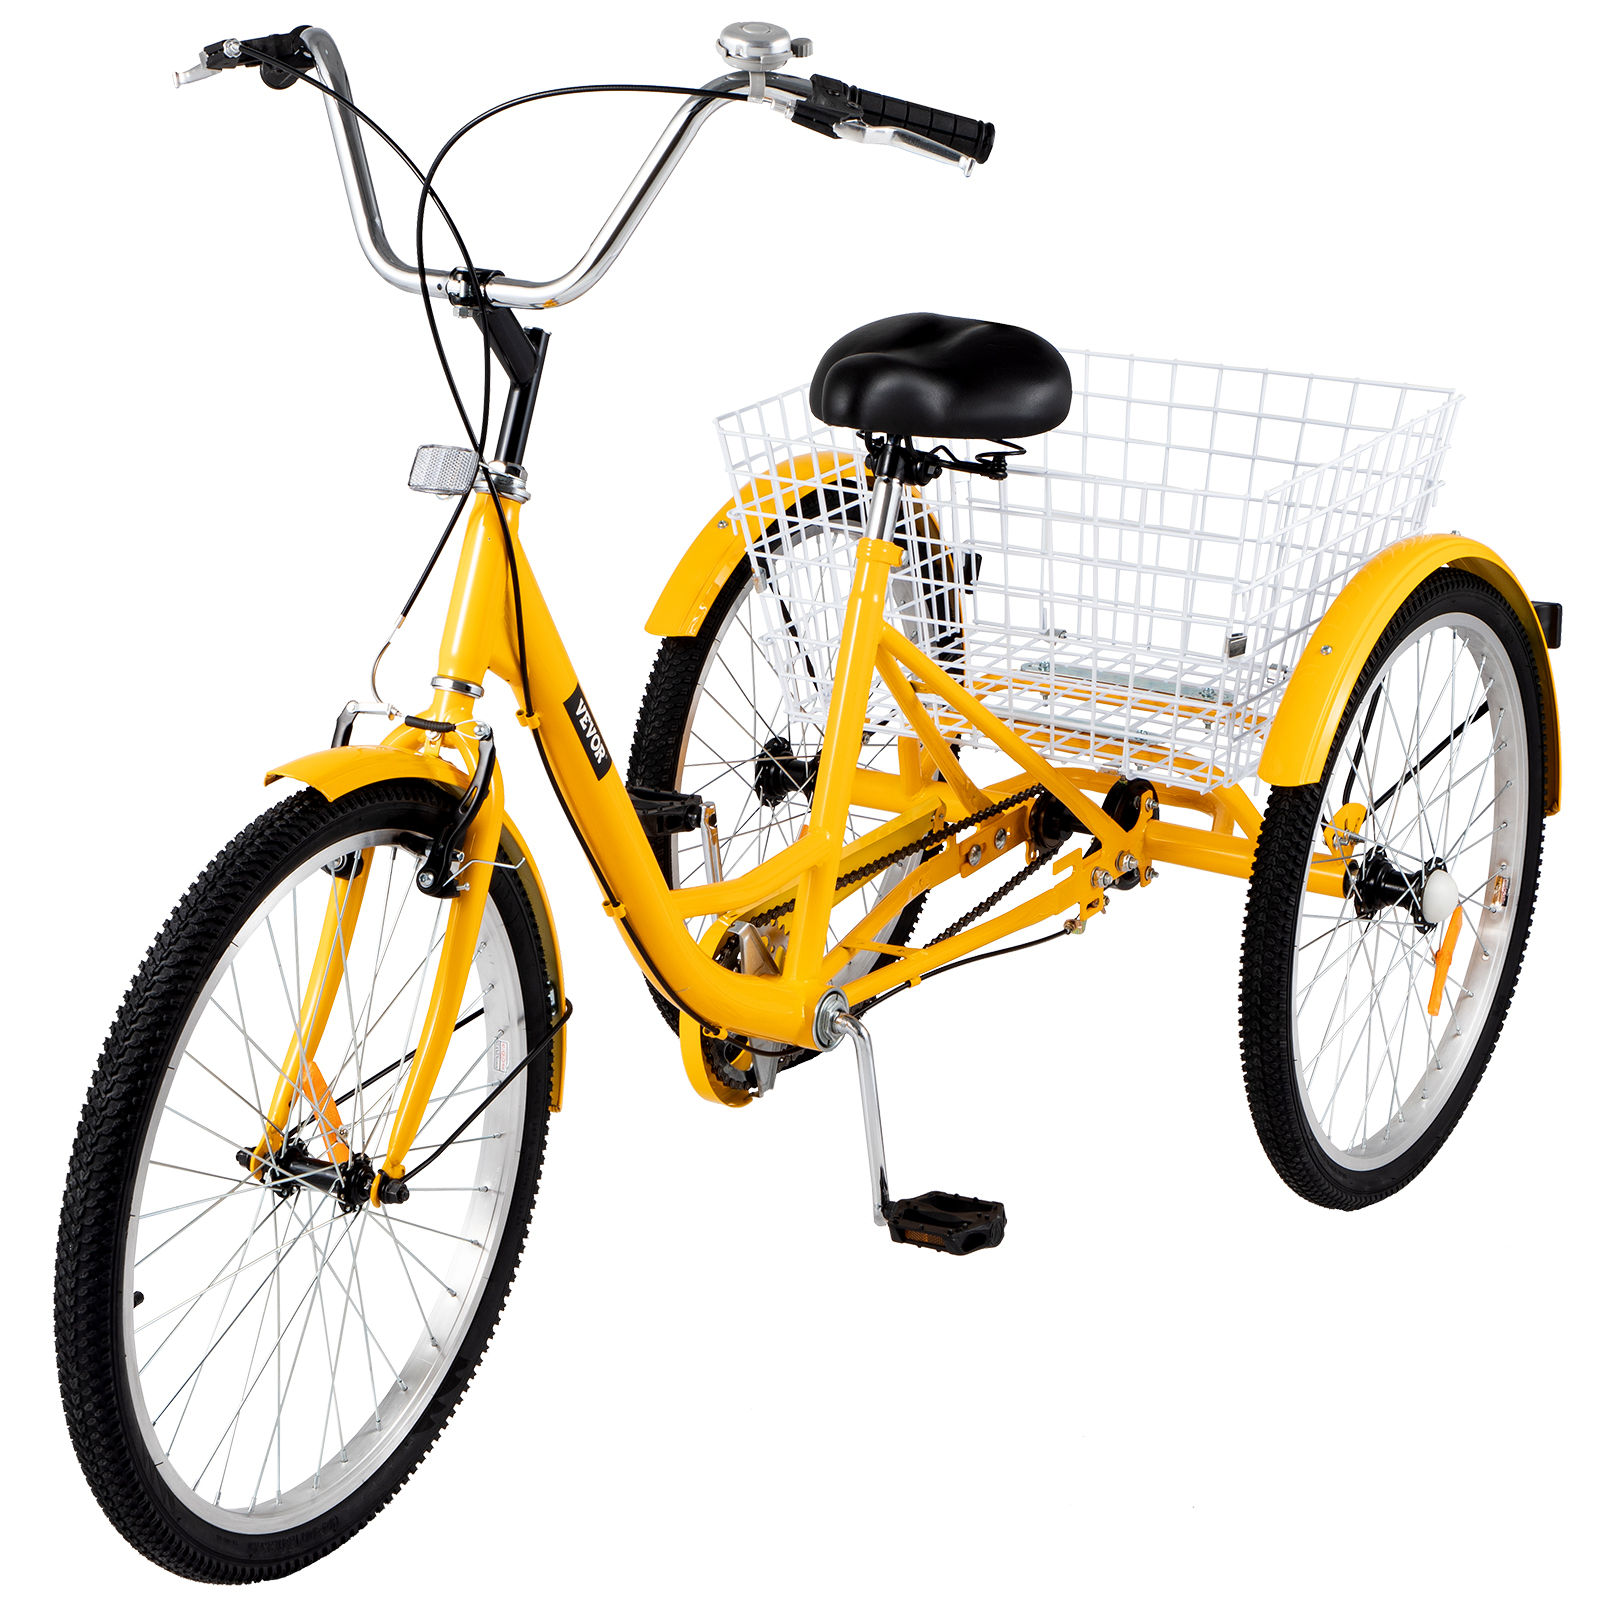 VEVOR Adult Tricycle 24 inch, 1-Speed Three Wheel Bikes , Yellow Tricycle with Bell Brake System, Bicycles with Cargo Basket for Shopping - image 9 of 9